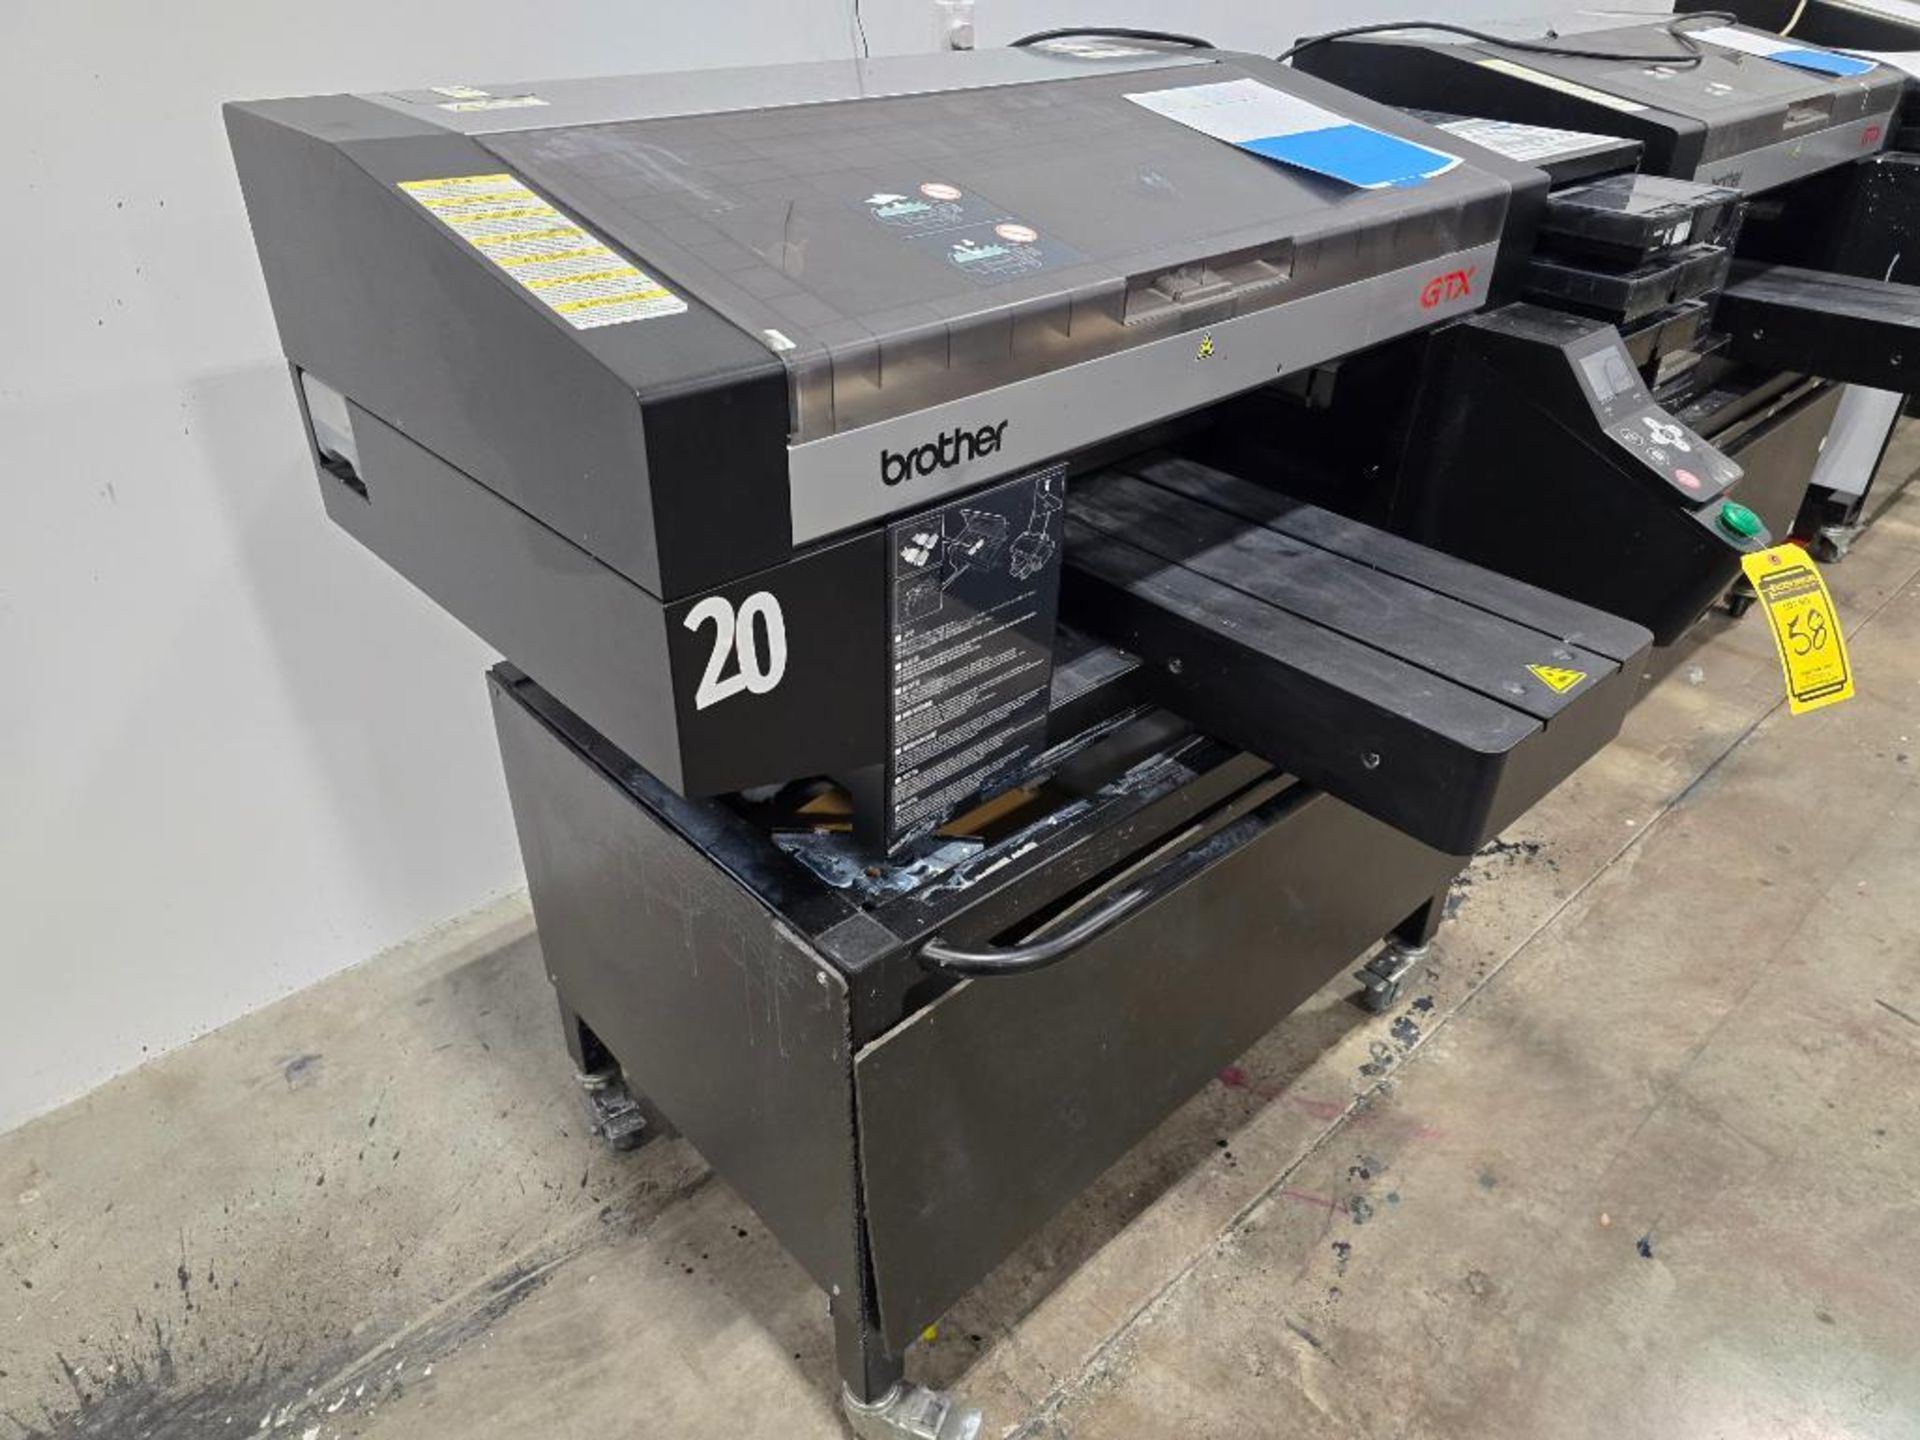 2018 Brother GTX-422 DTG (Direct to Garment) Printer, Twin Head, 6-Color, Textile & Water Based Pigm - Image 3 of 10